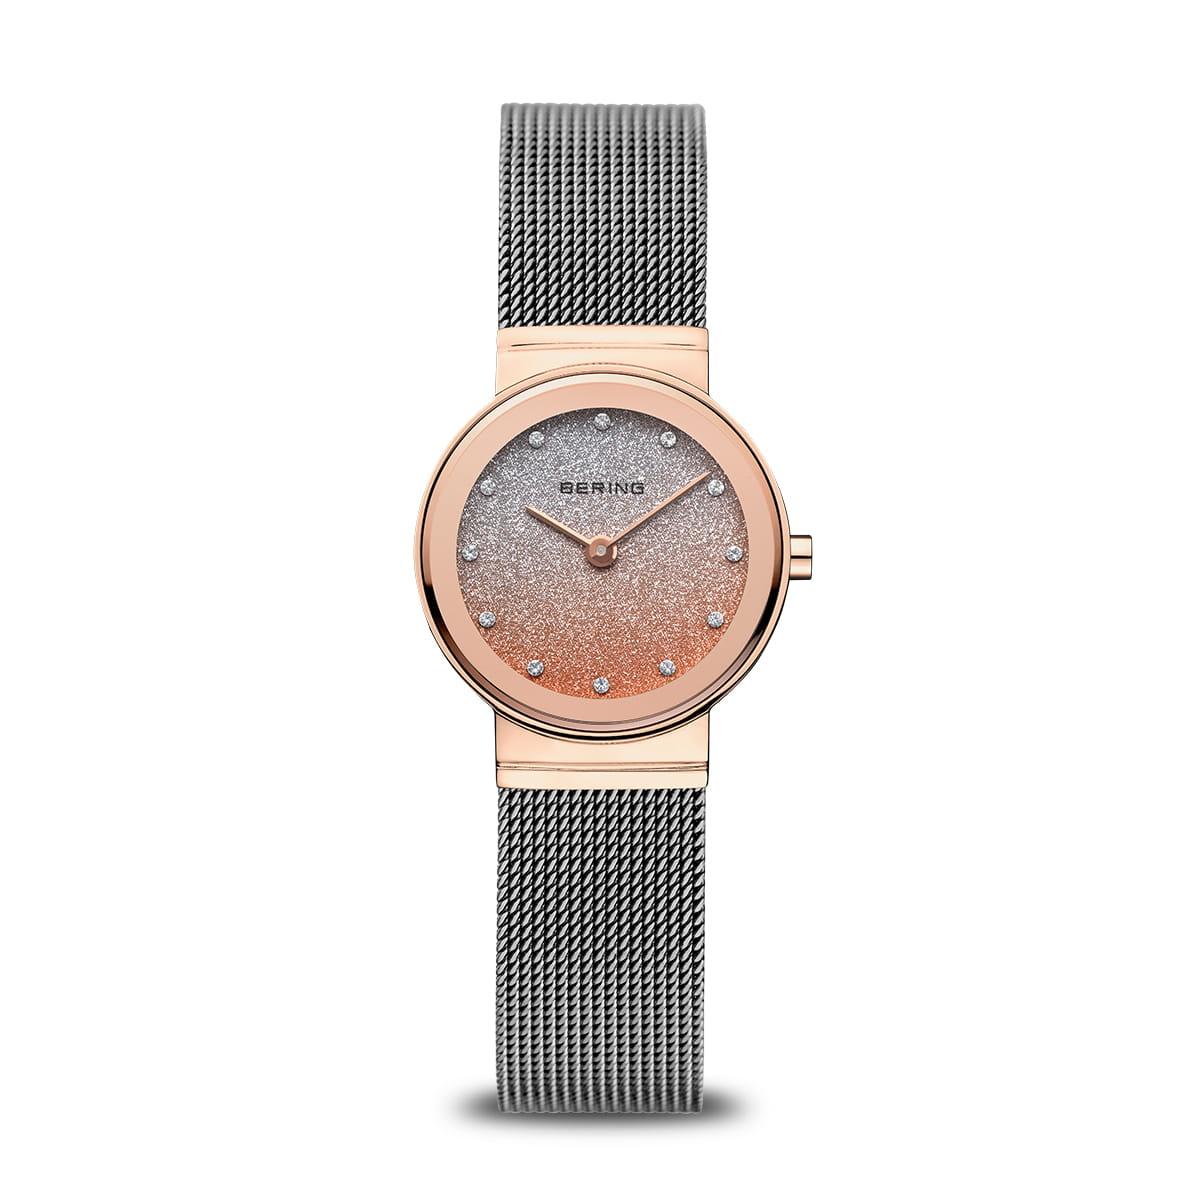 Bering Classic Rose Gold Plated Sparkle Dial Mesh Watch 10126-0663 - Judith Hart Jewellers